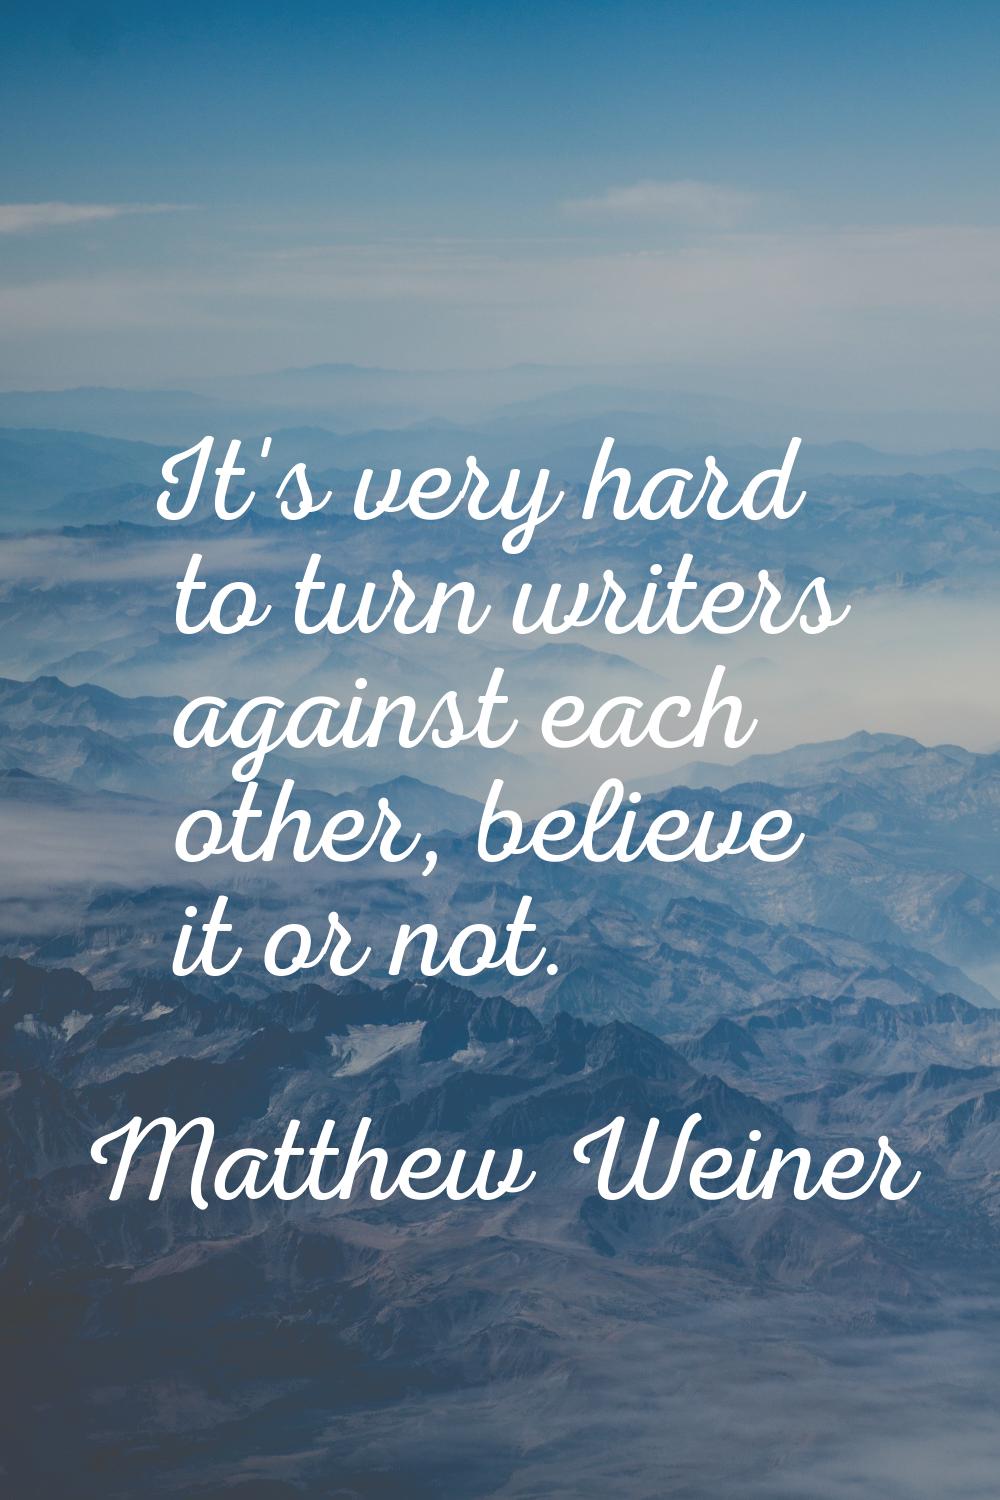 It's very hard to turn writers against each other, believe it or not.